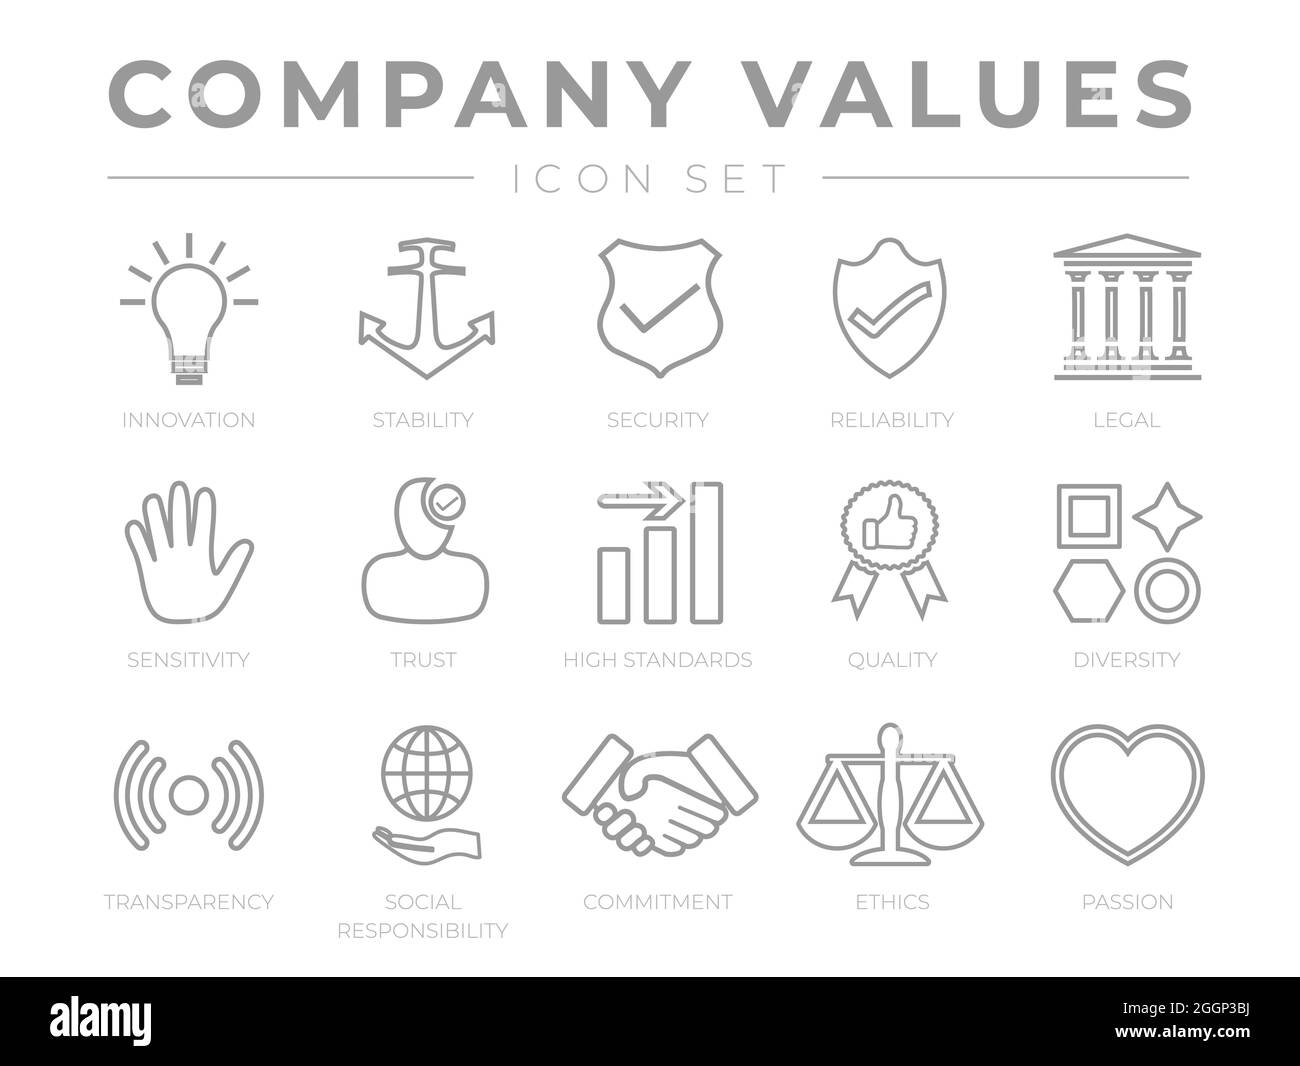 Outline Company Core Values icon Set. Innovation, Stability, Security, Reliability, Legal, Sensitivity, Trust, High Standard, Quality, Diversity, Tran Stock Vector